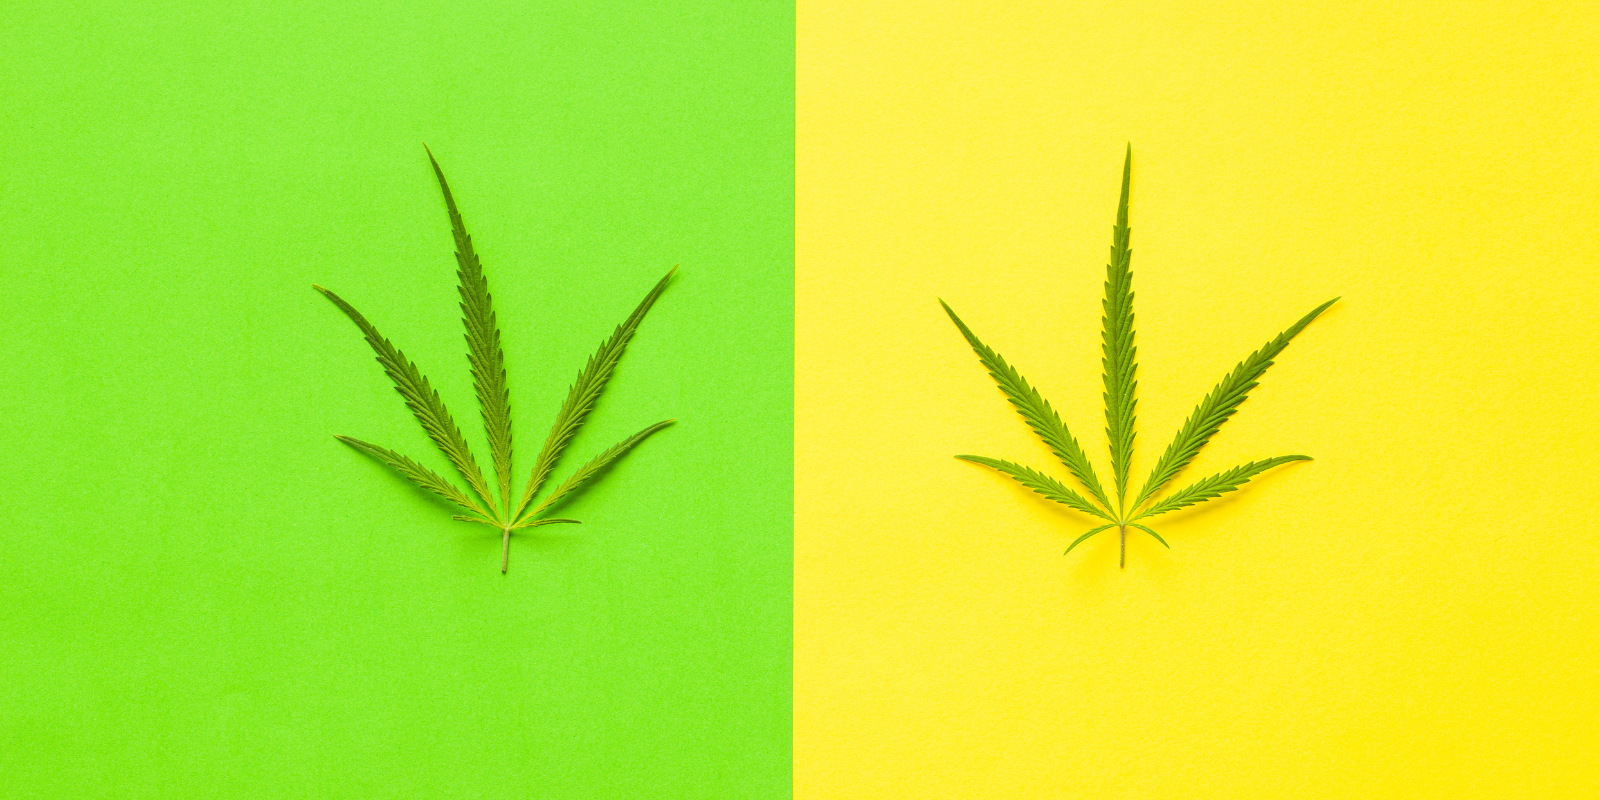 cannabis leaves on green and yellow backgrounds